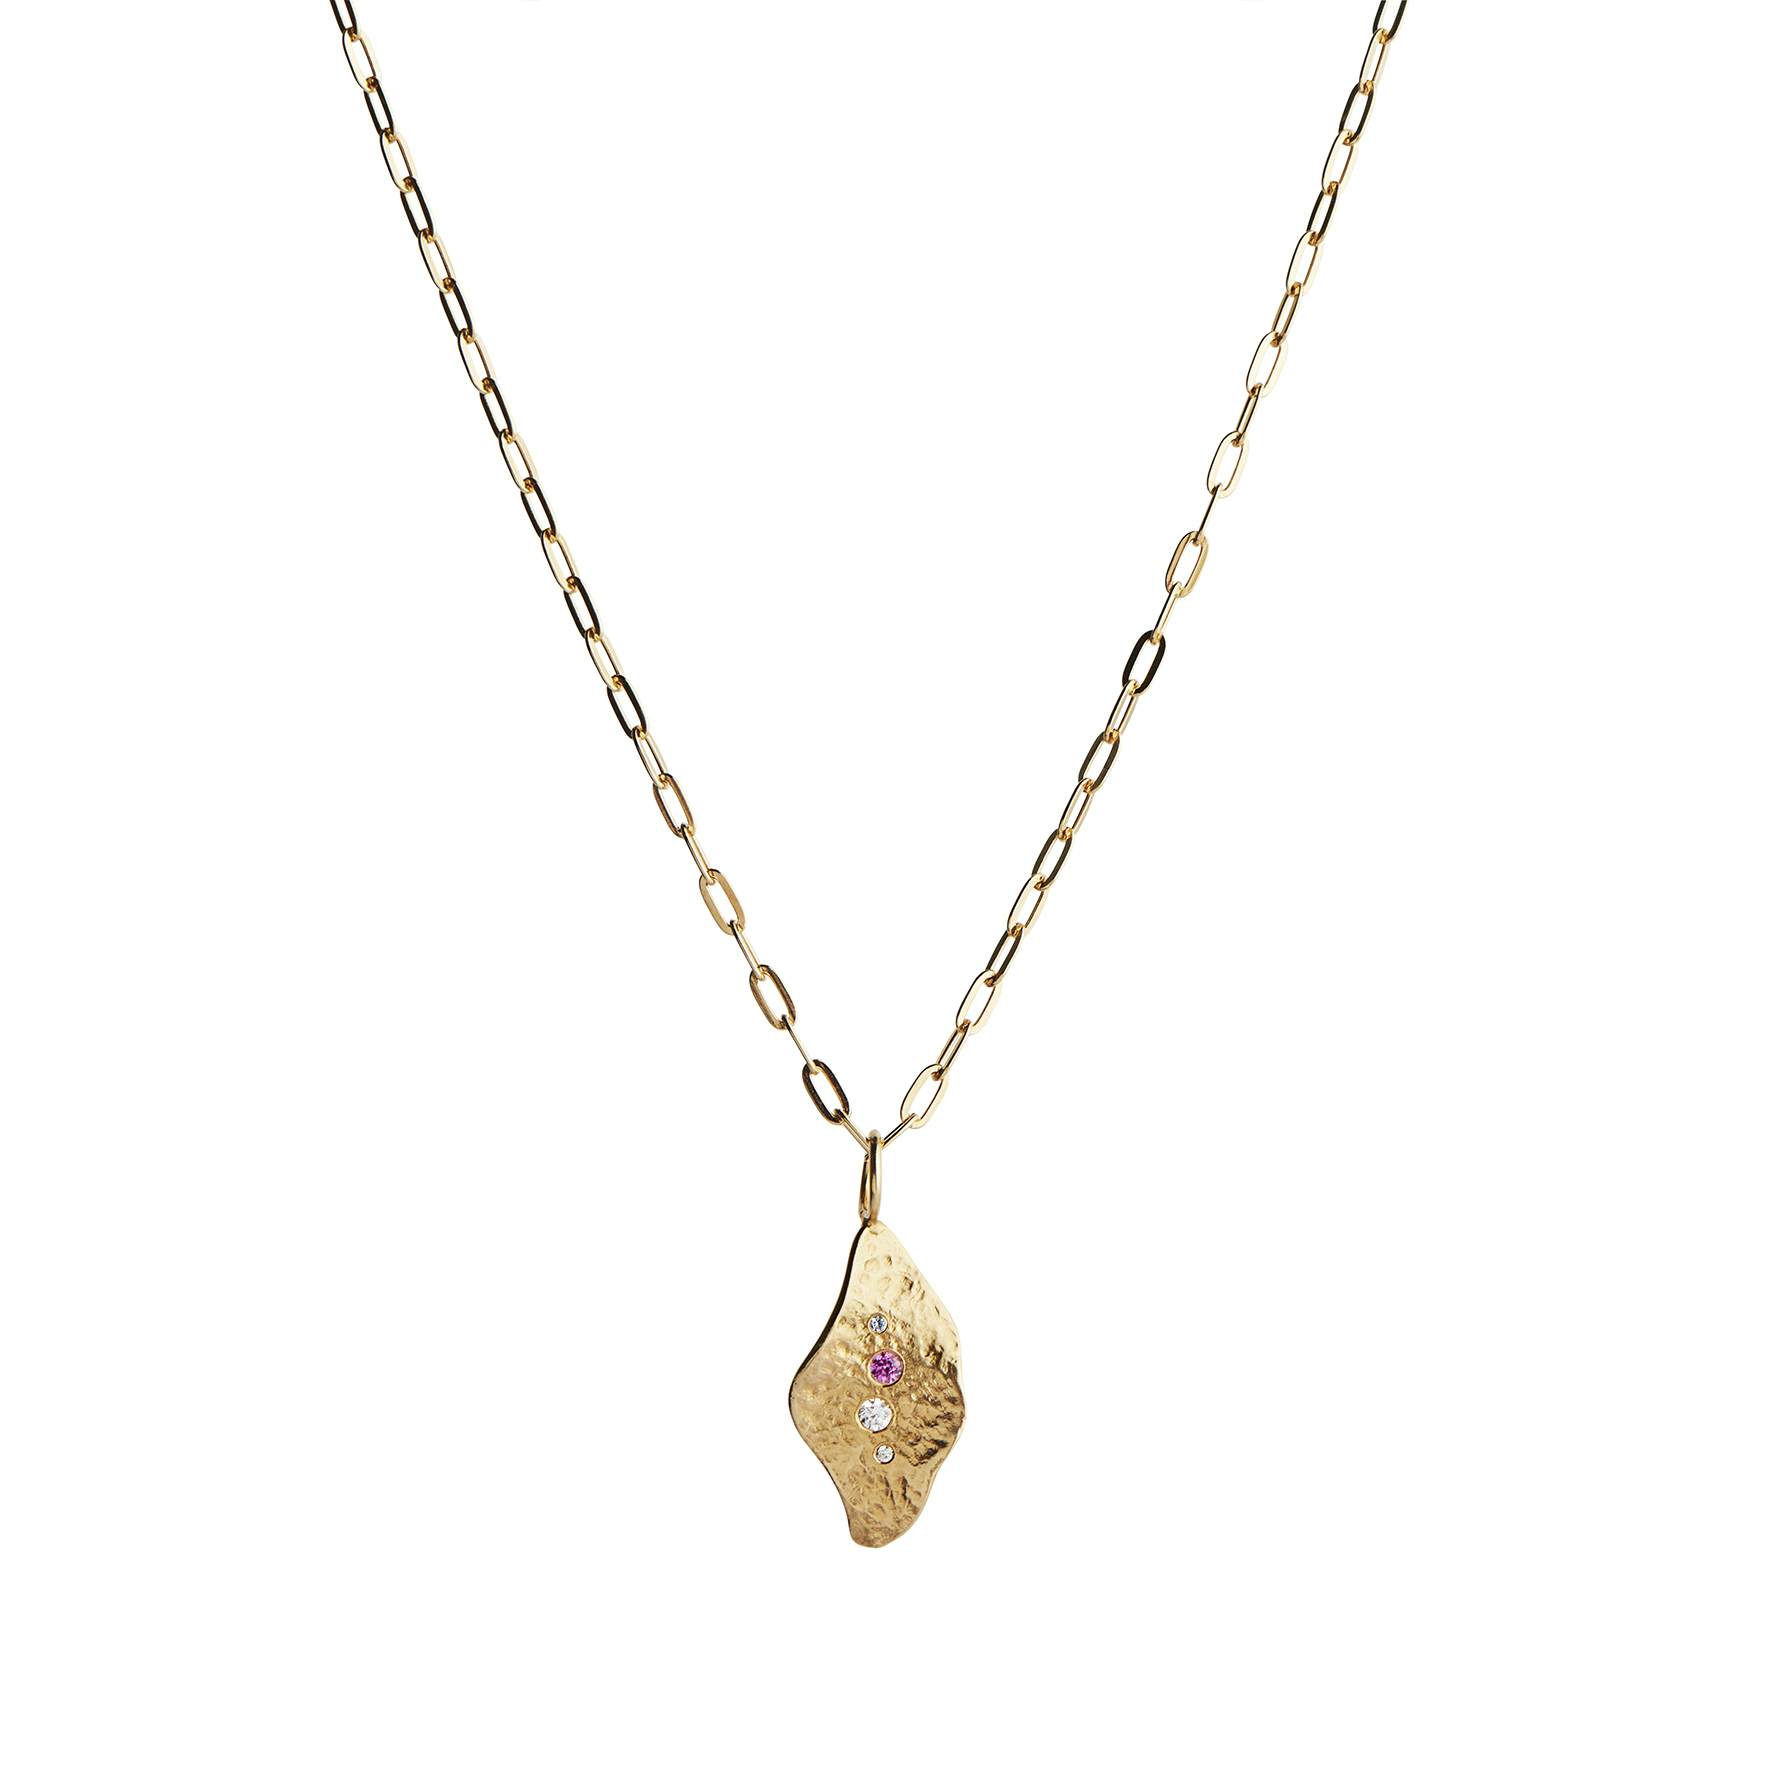 I'le De L'amour Pendant from STINE A Jewelry in Goldplated-Silver Sterling 925